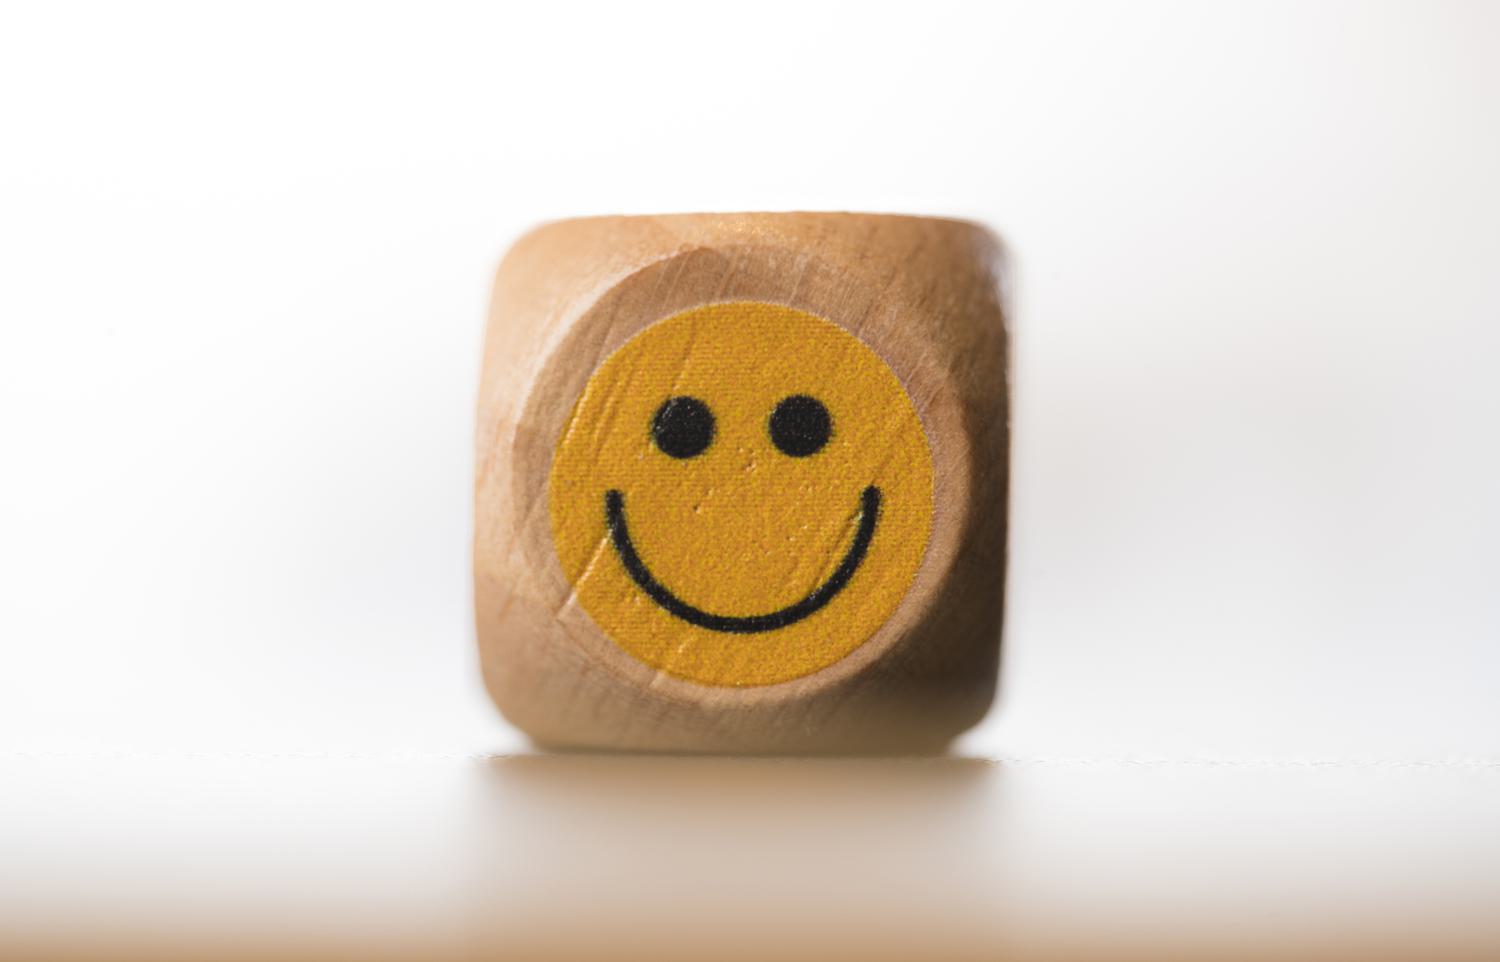 Beautifully crafted wooden dice with a different emoticon on each face